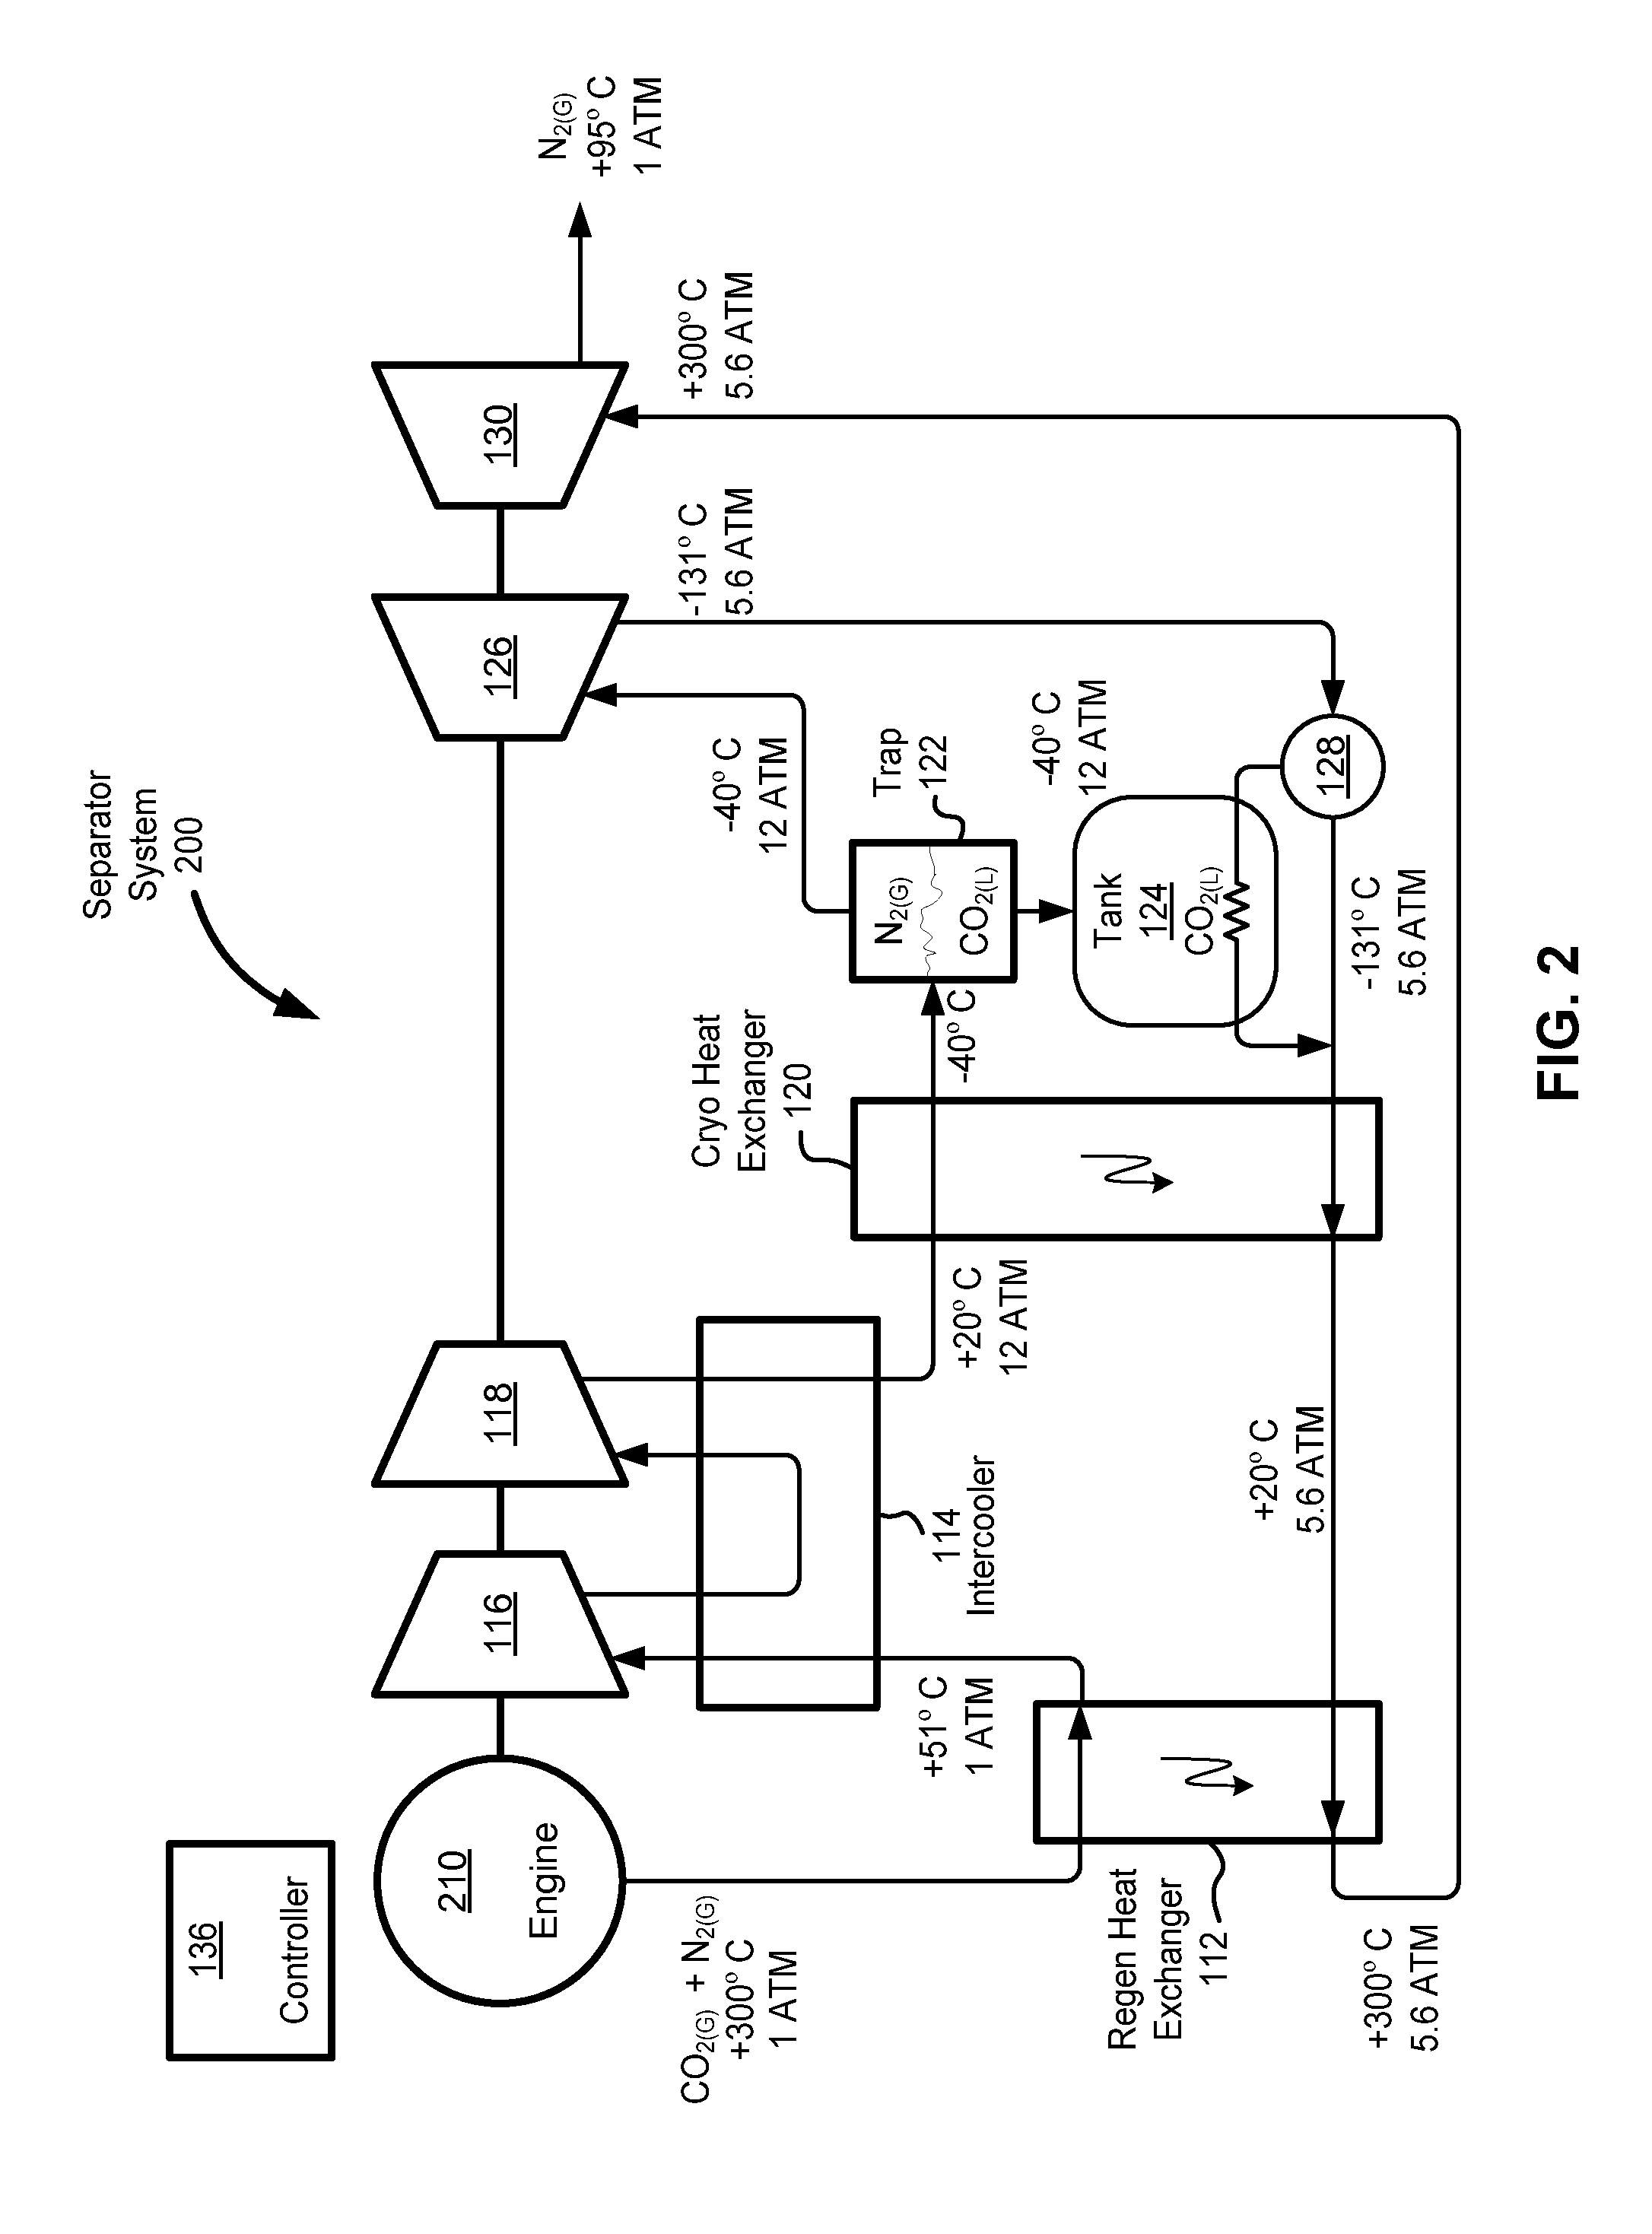 System and method for separating gasses in an exhaust gas